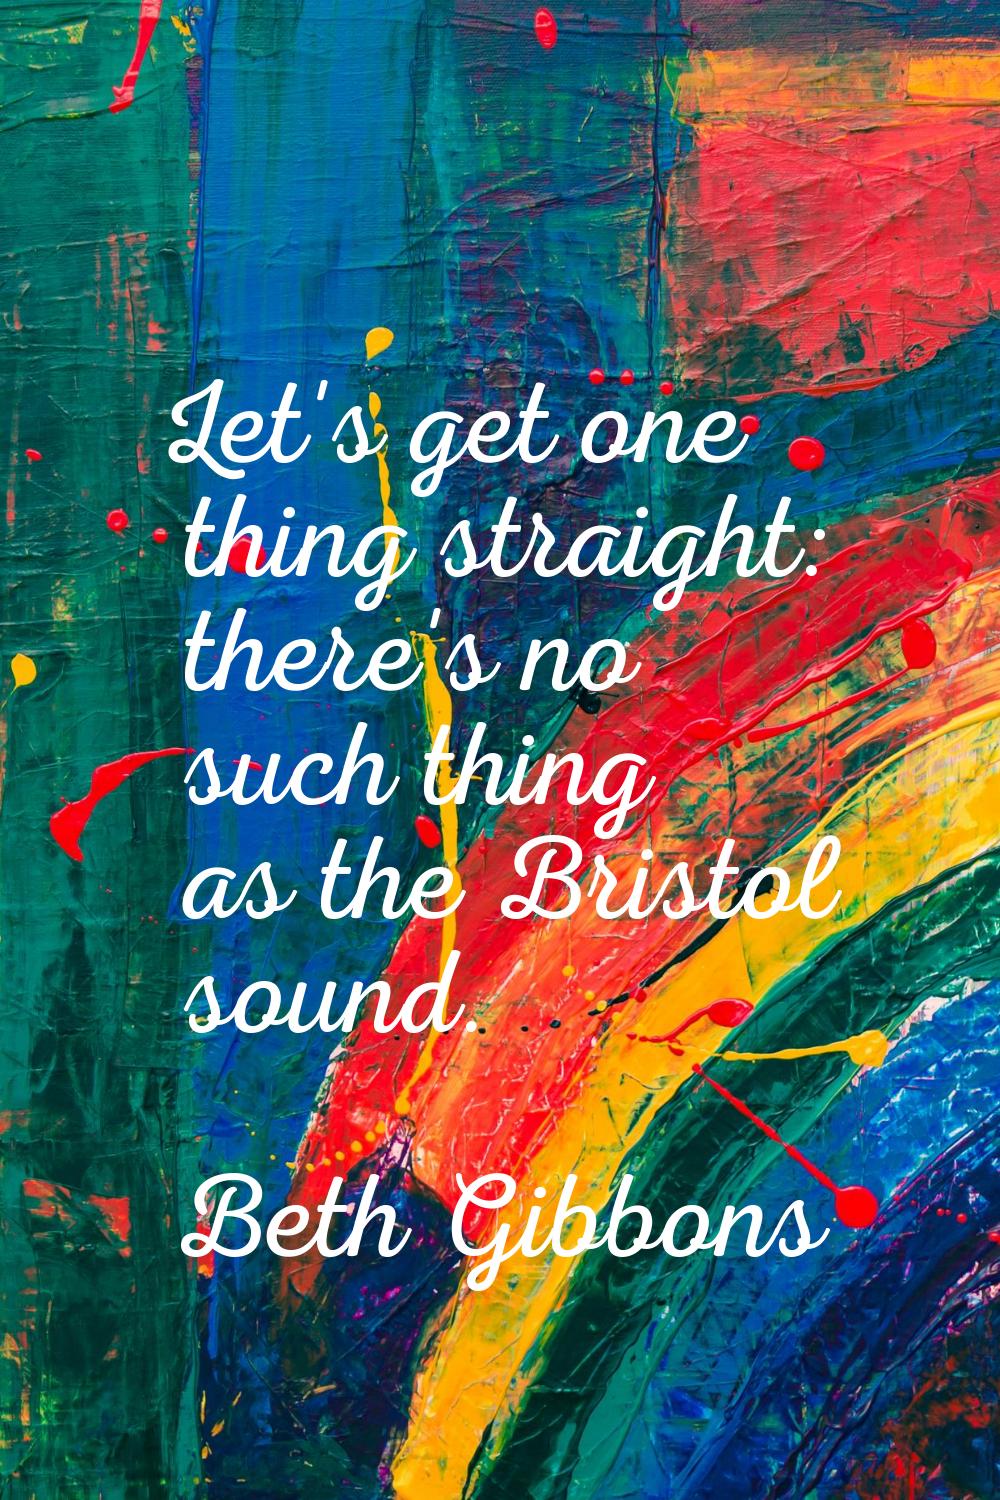 Let's get one thing straight: there's no such thing as the Bristol sound.